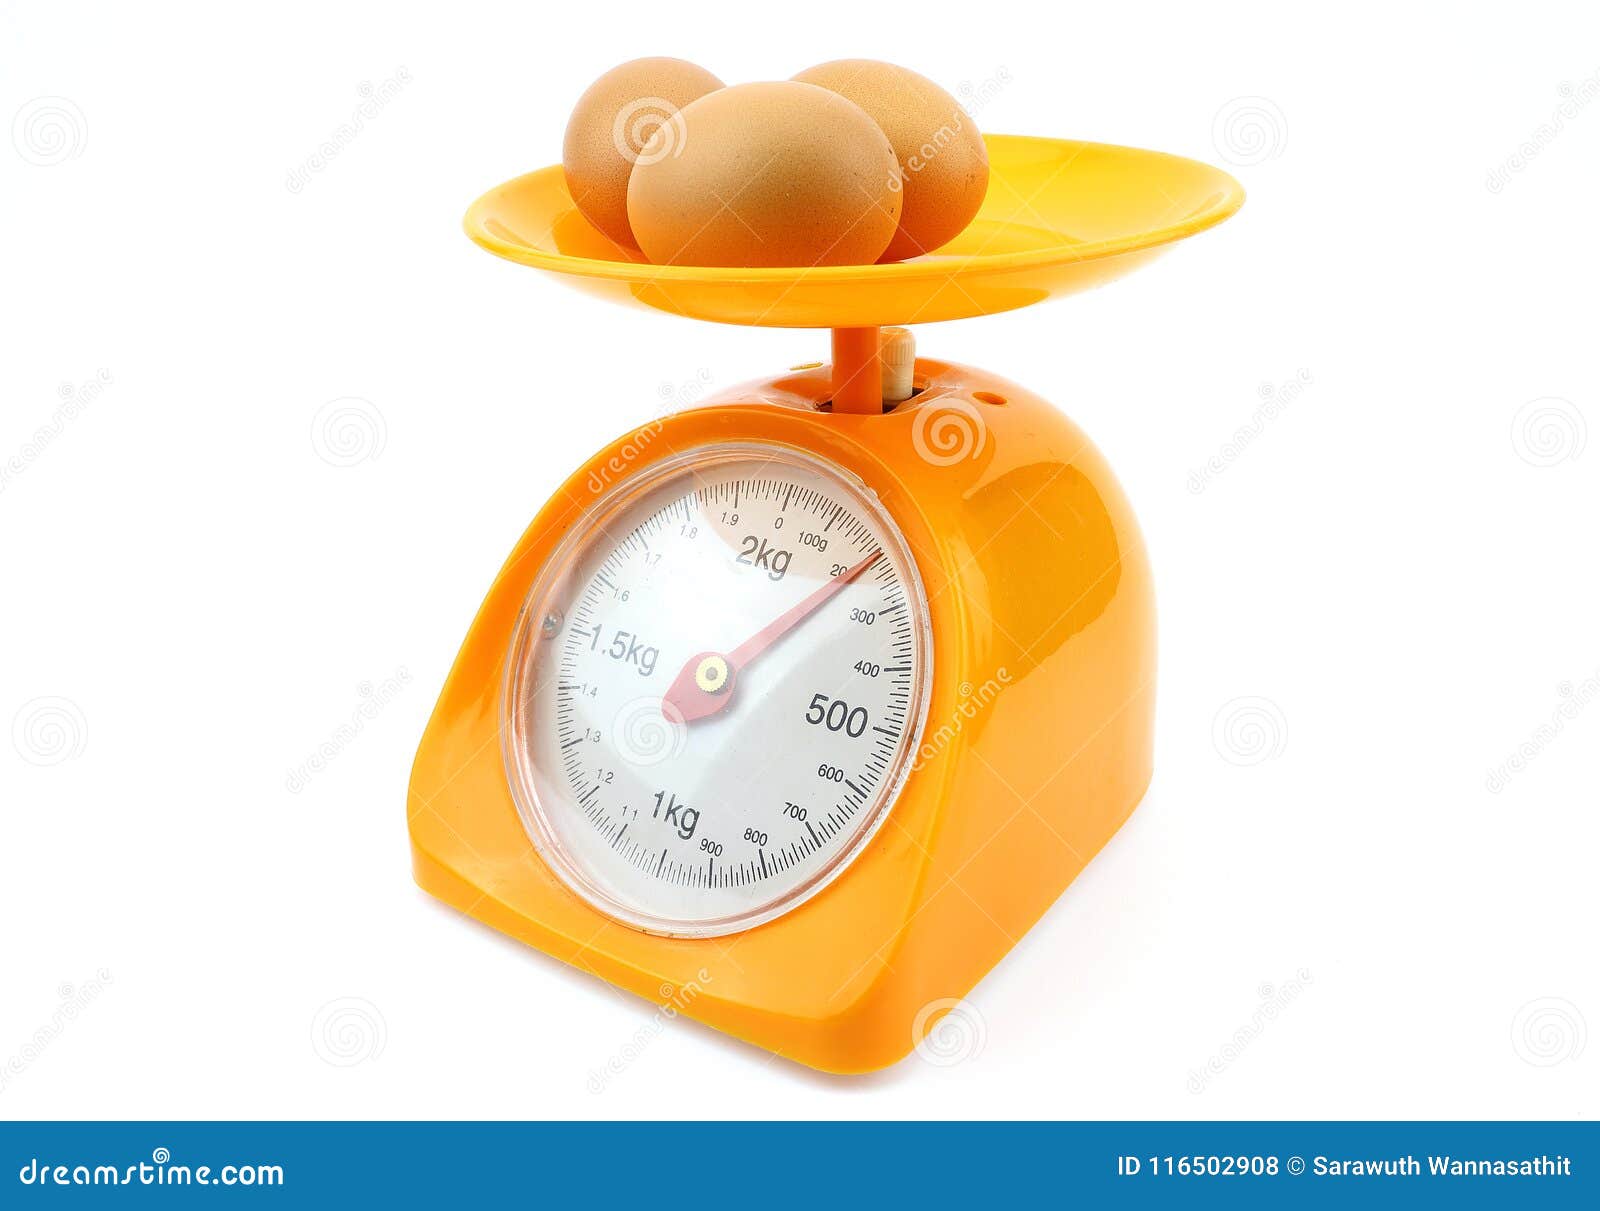 Egg on weight scale stock photo. Image of nature, object - 116502908